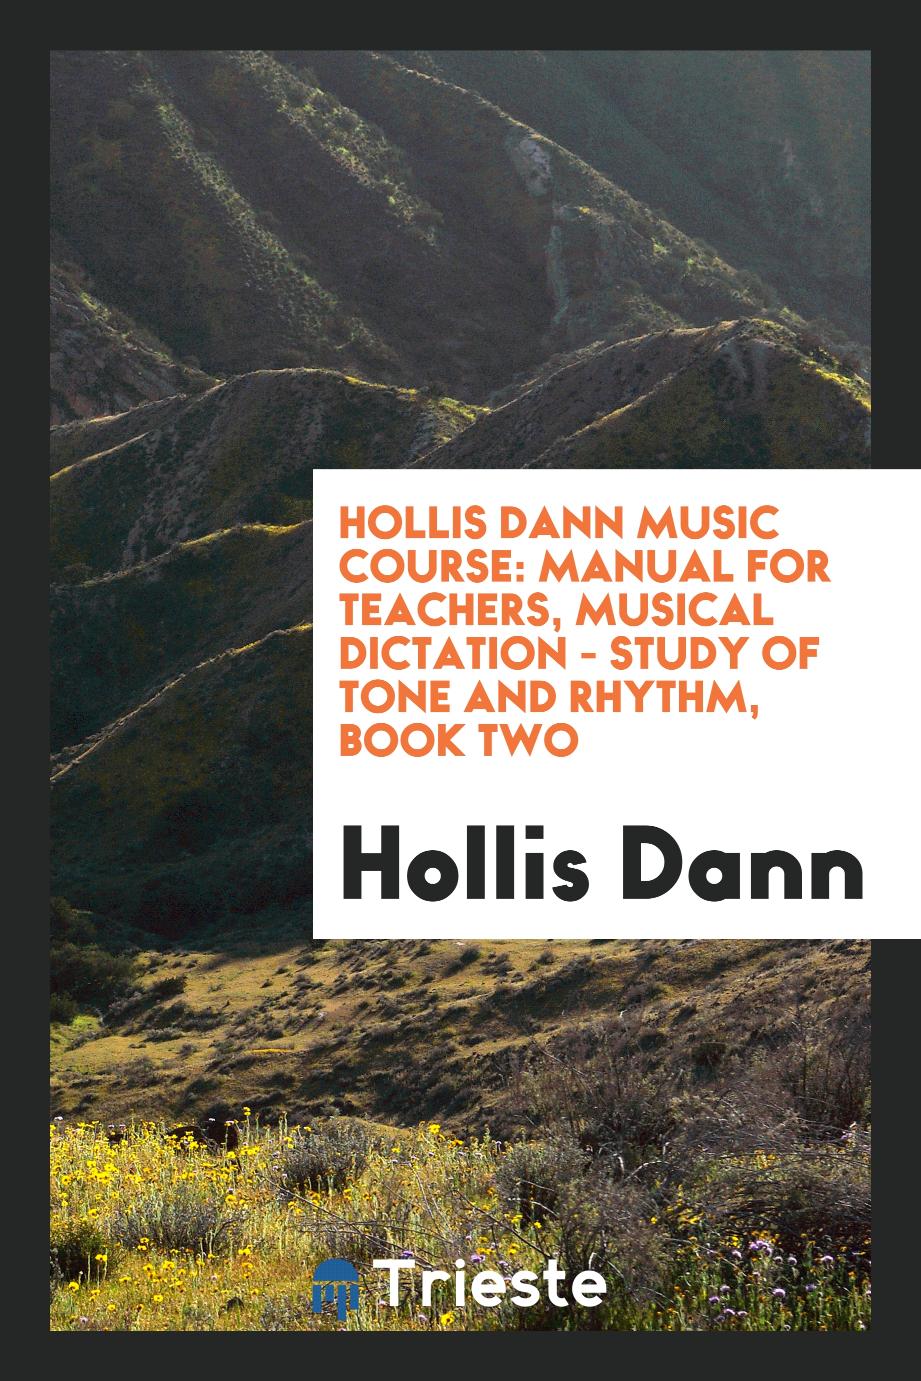 Hollis Dann Music Course: Manual for Teachers, Musical Dictation - Study of Tone and Rhythm, Book Two